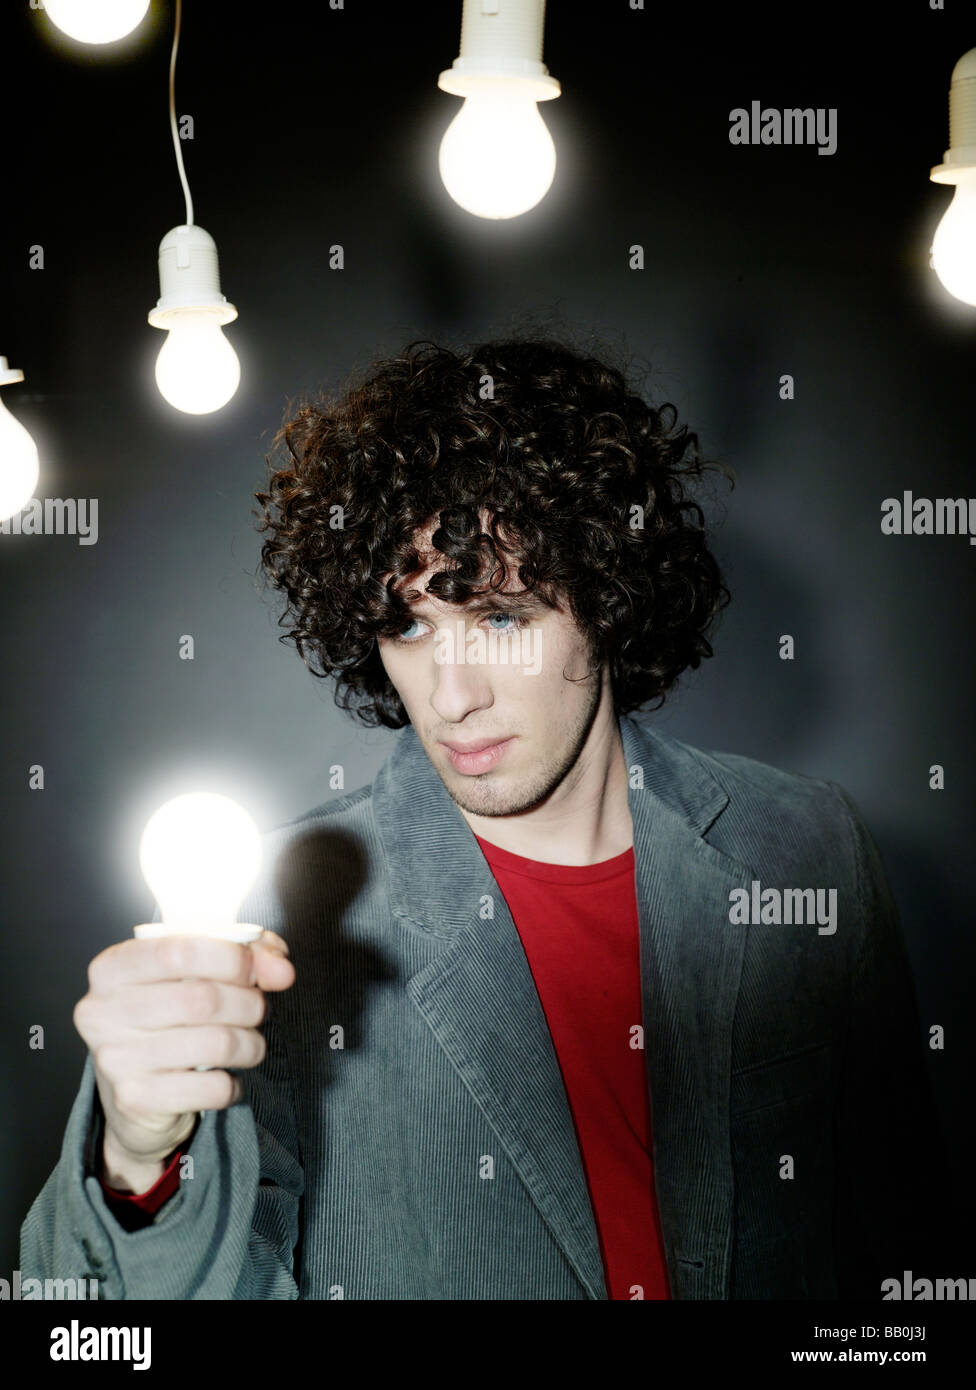 1251741 people man 20 25 curly dark haired light bulb bulbs hold indoor vertical Stock Photo